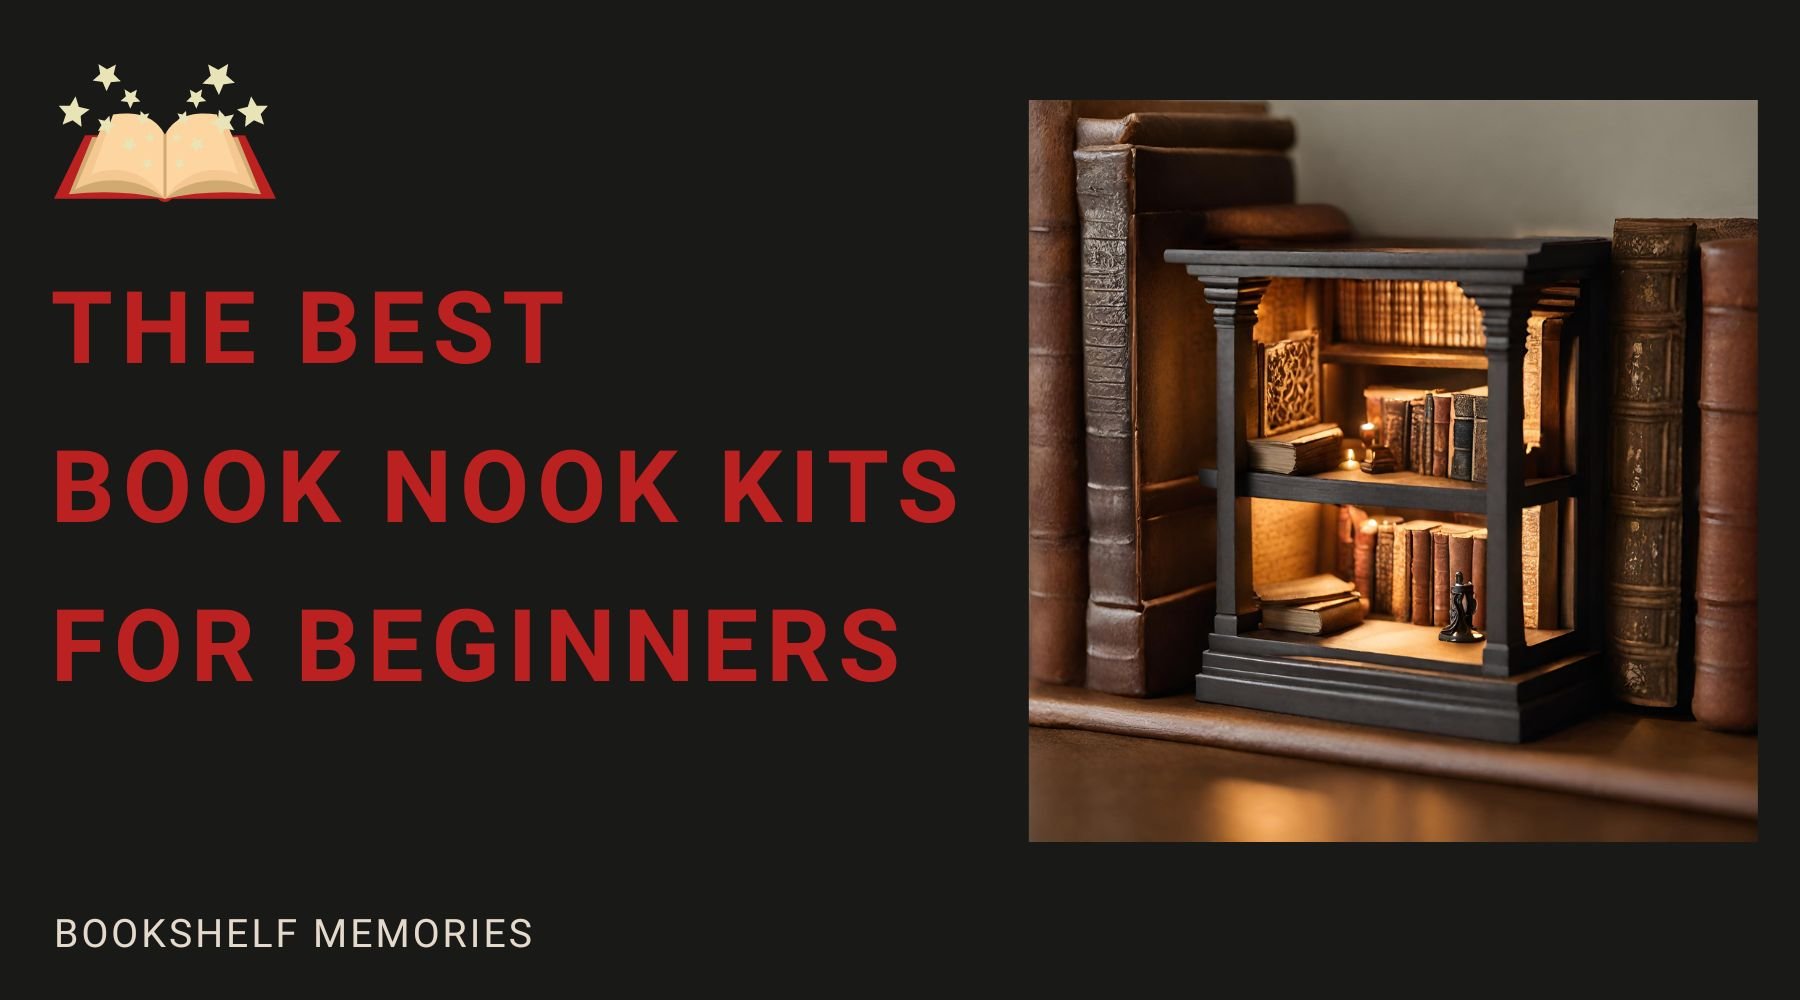 Best Book Nook Kits for Beginners who Doubt their Creative Skills